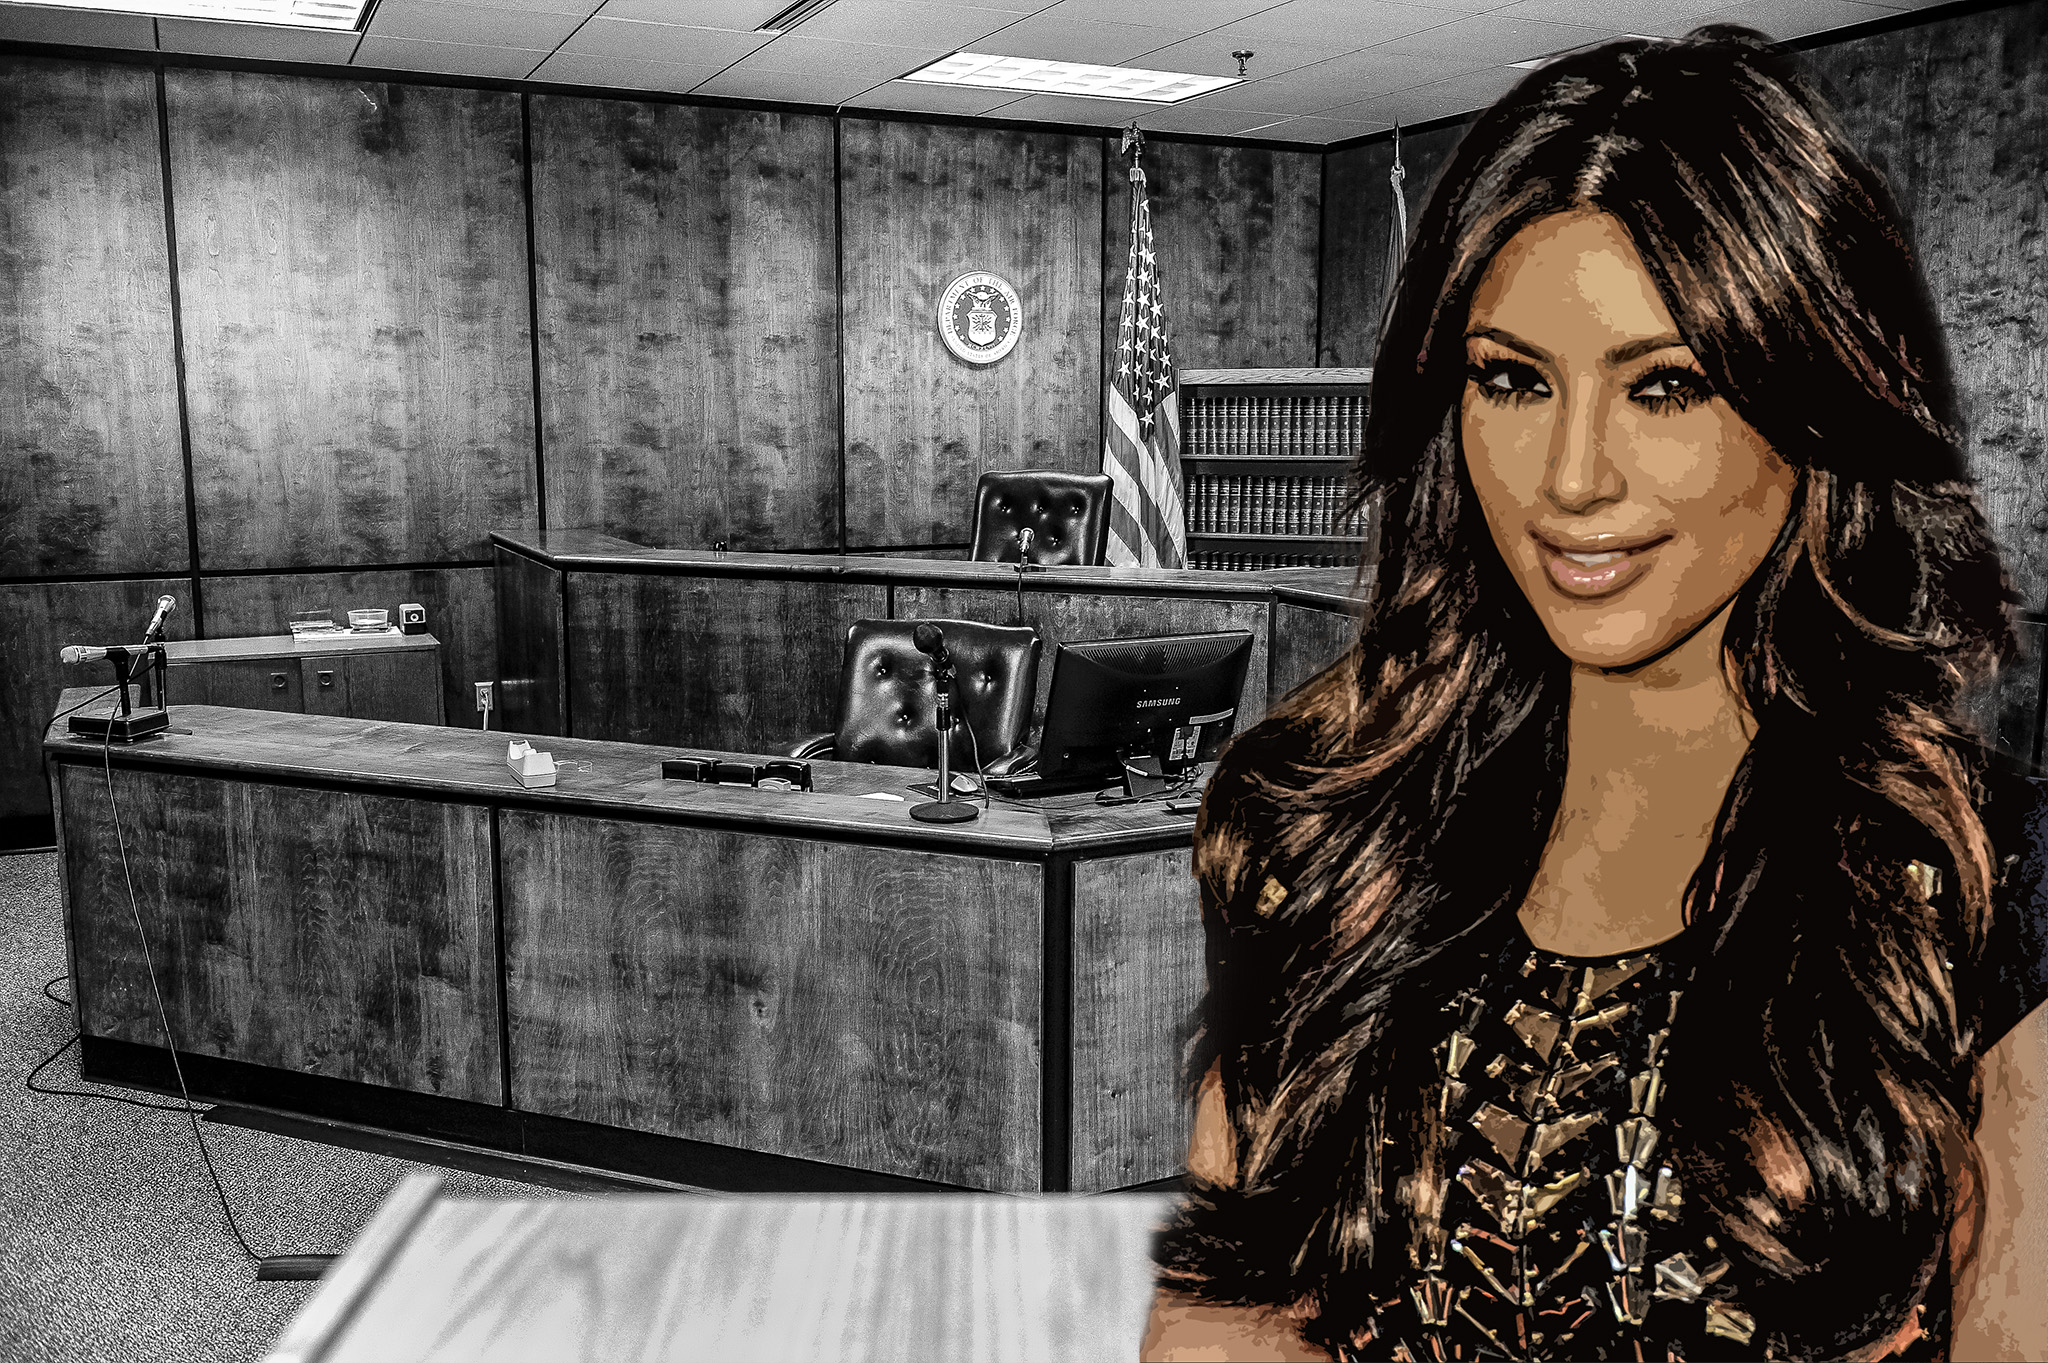 Opinion Kim Kardashian Working The System On Her Journey To Become A Lawyer Shows The Power Of